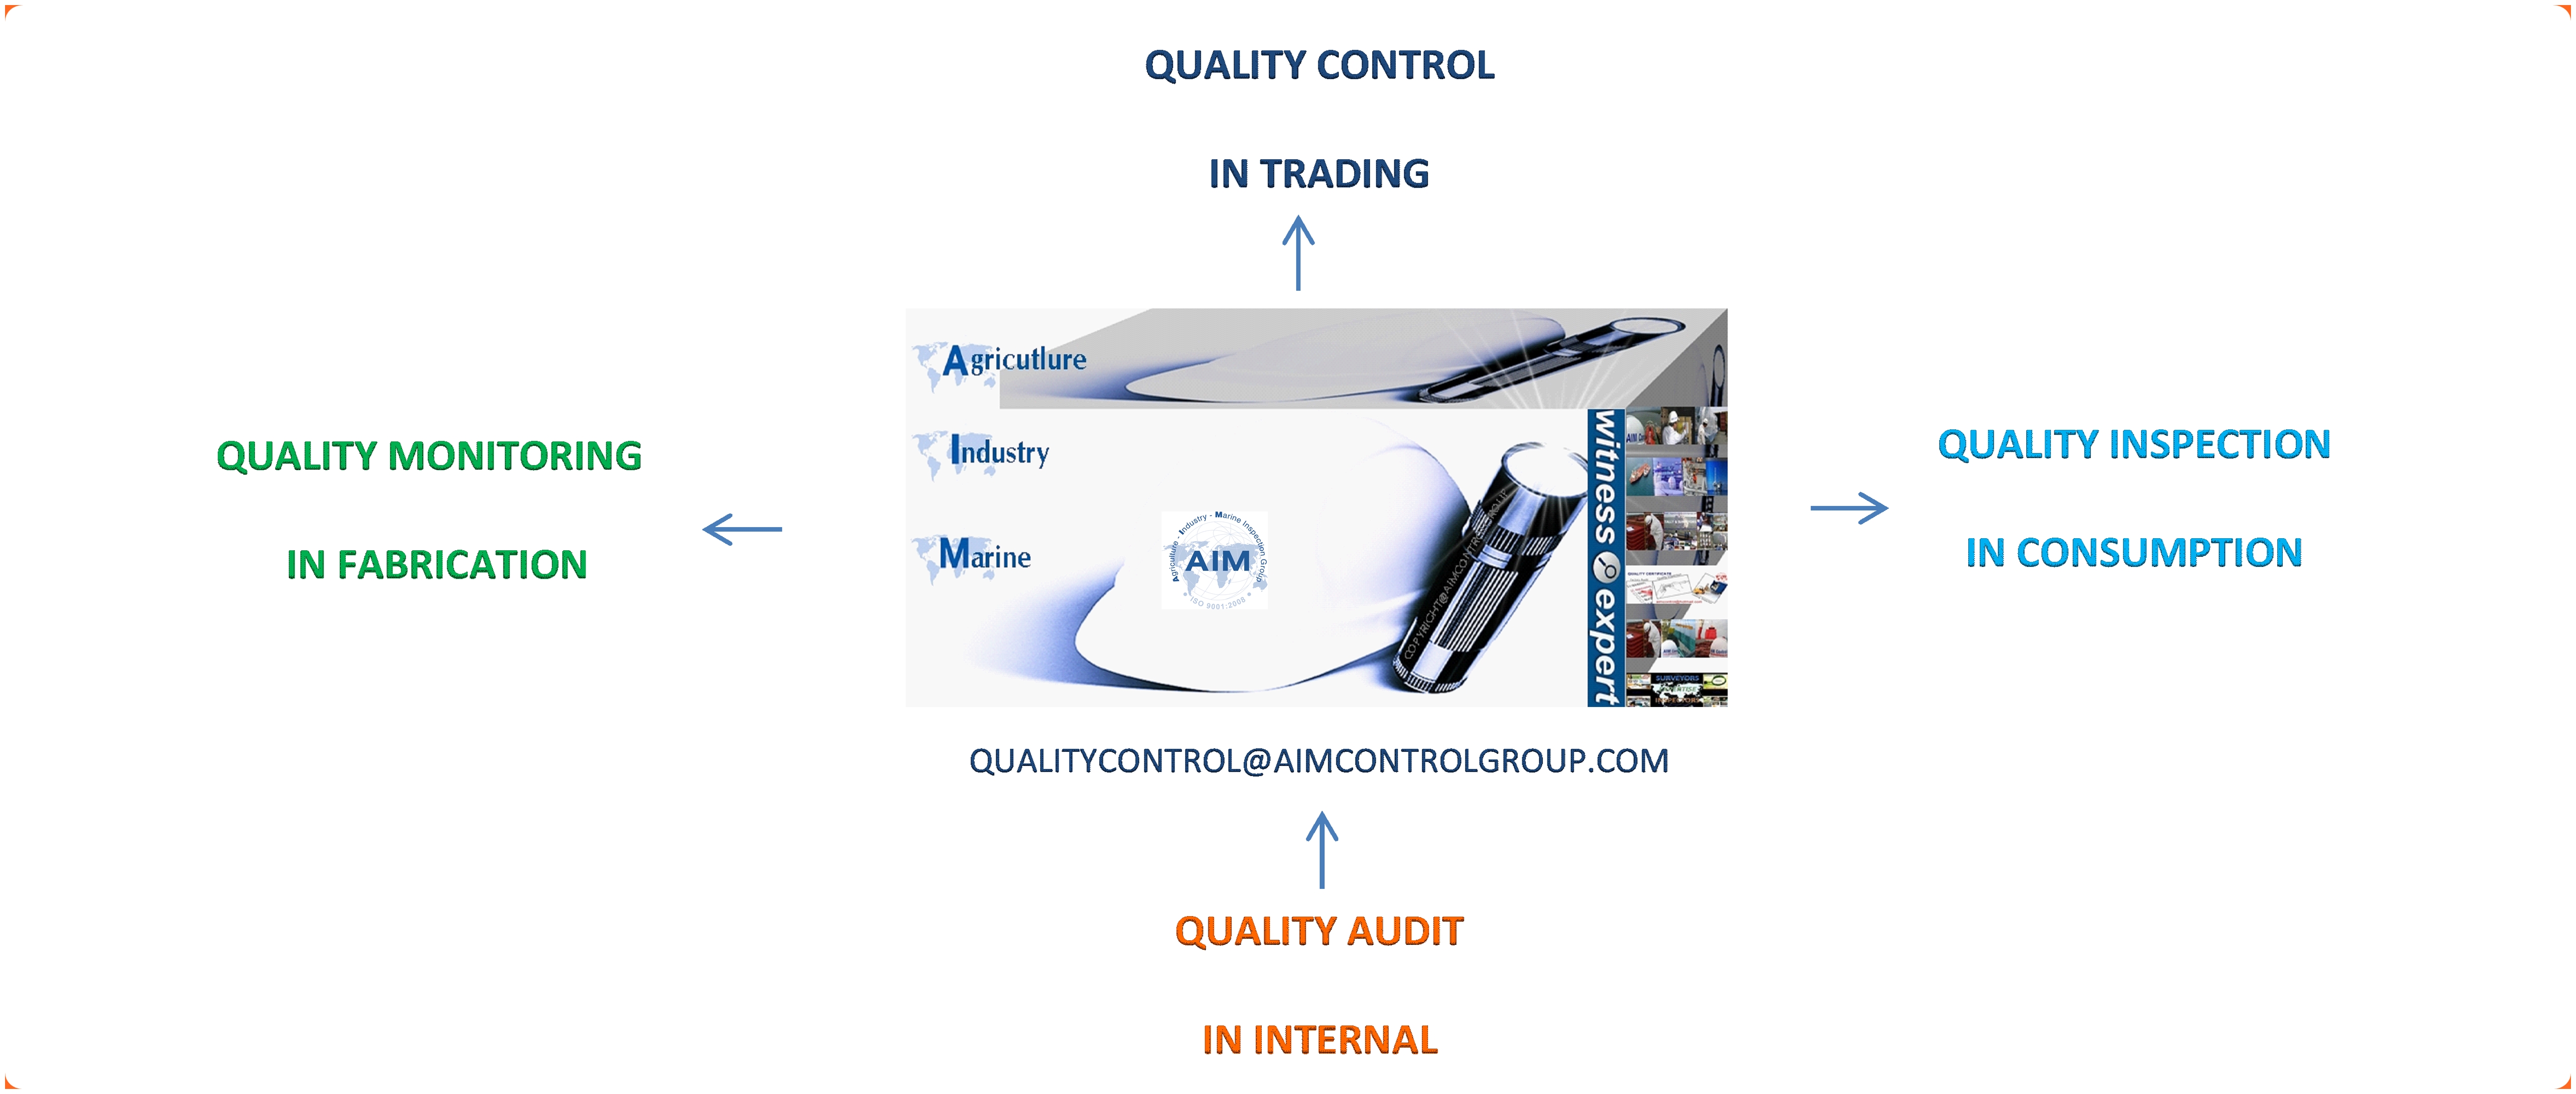 AIM_Control_Quality_Control_Inspection_Certification_services_company